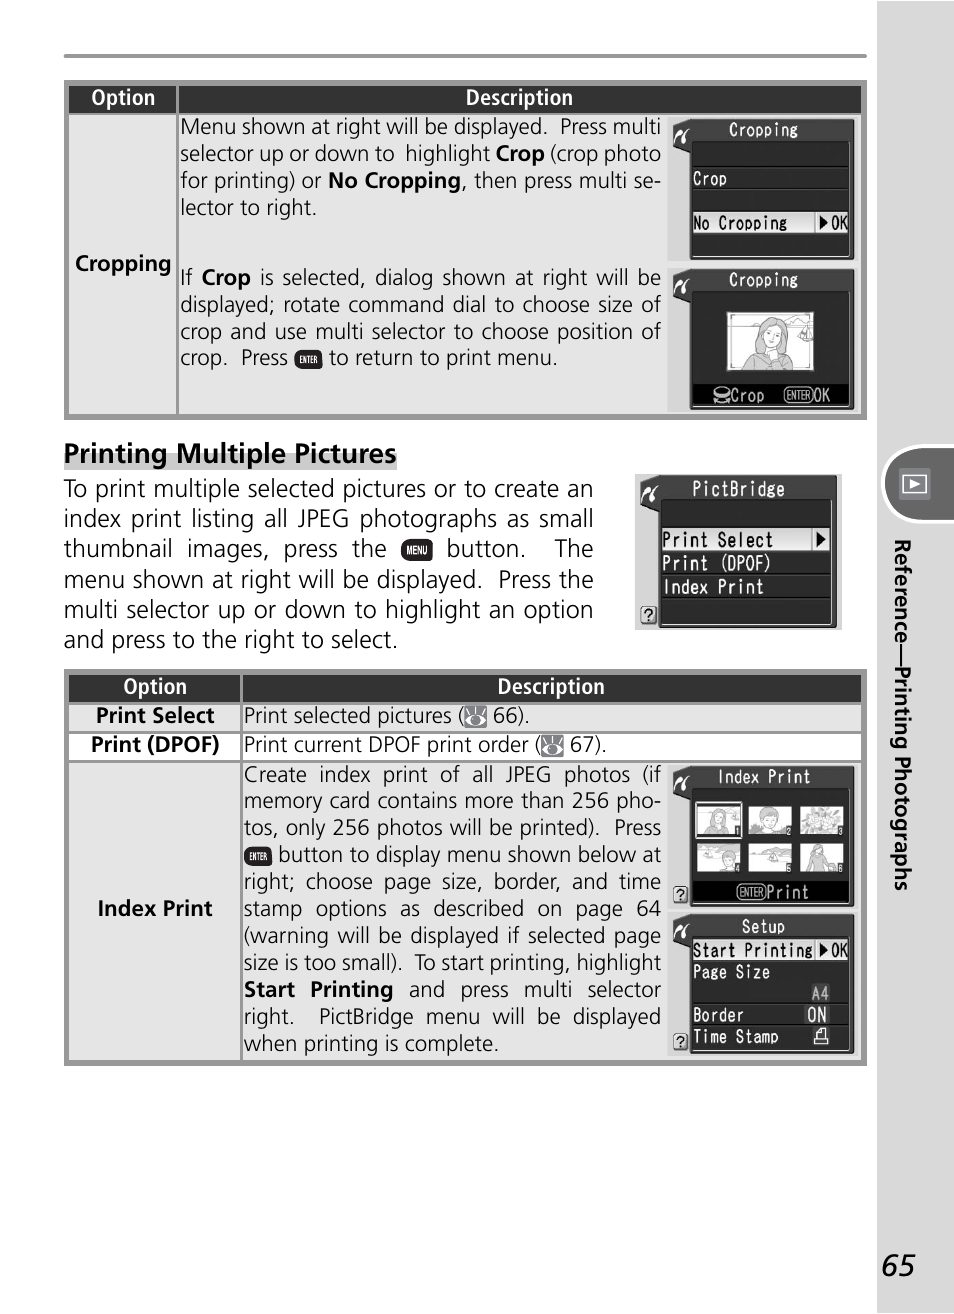 Printing multiple pictures | Nikon D50 User Manual | Page 75 / 148